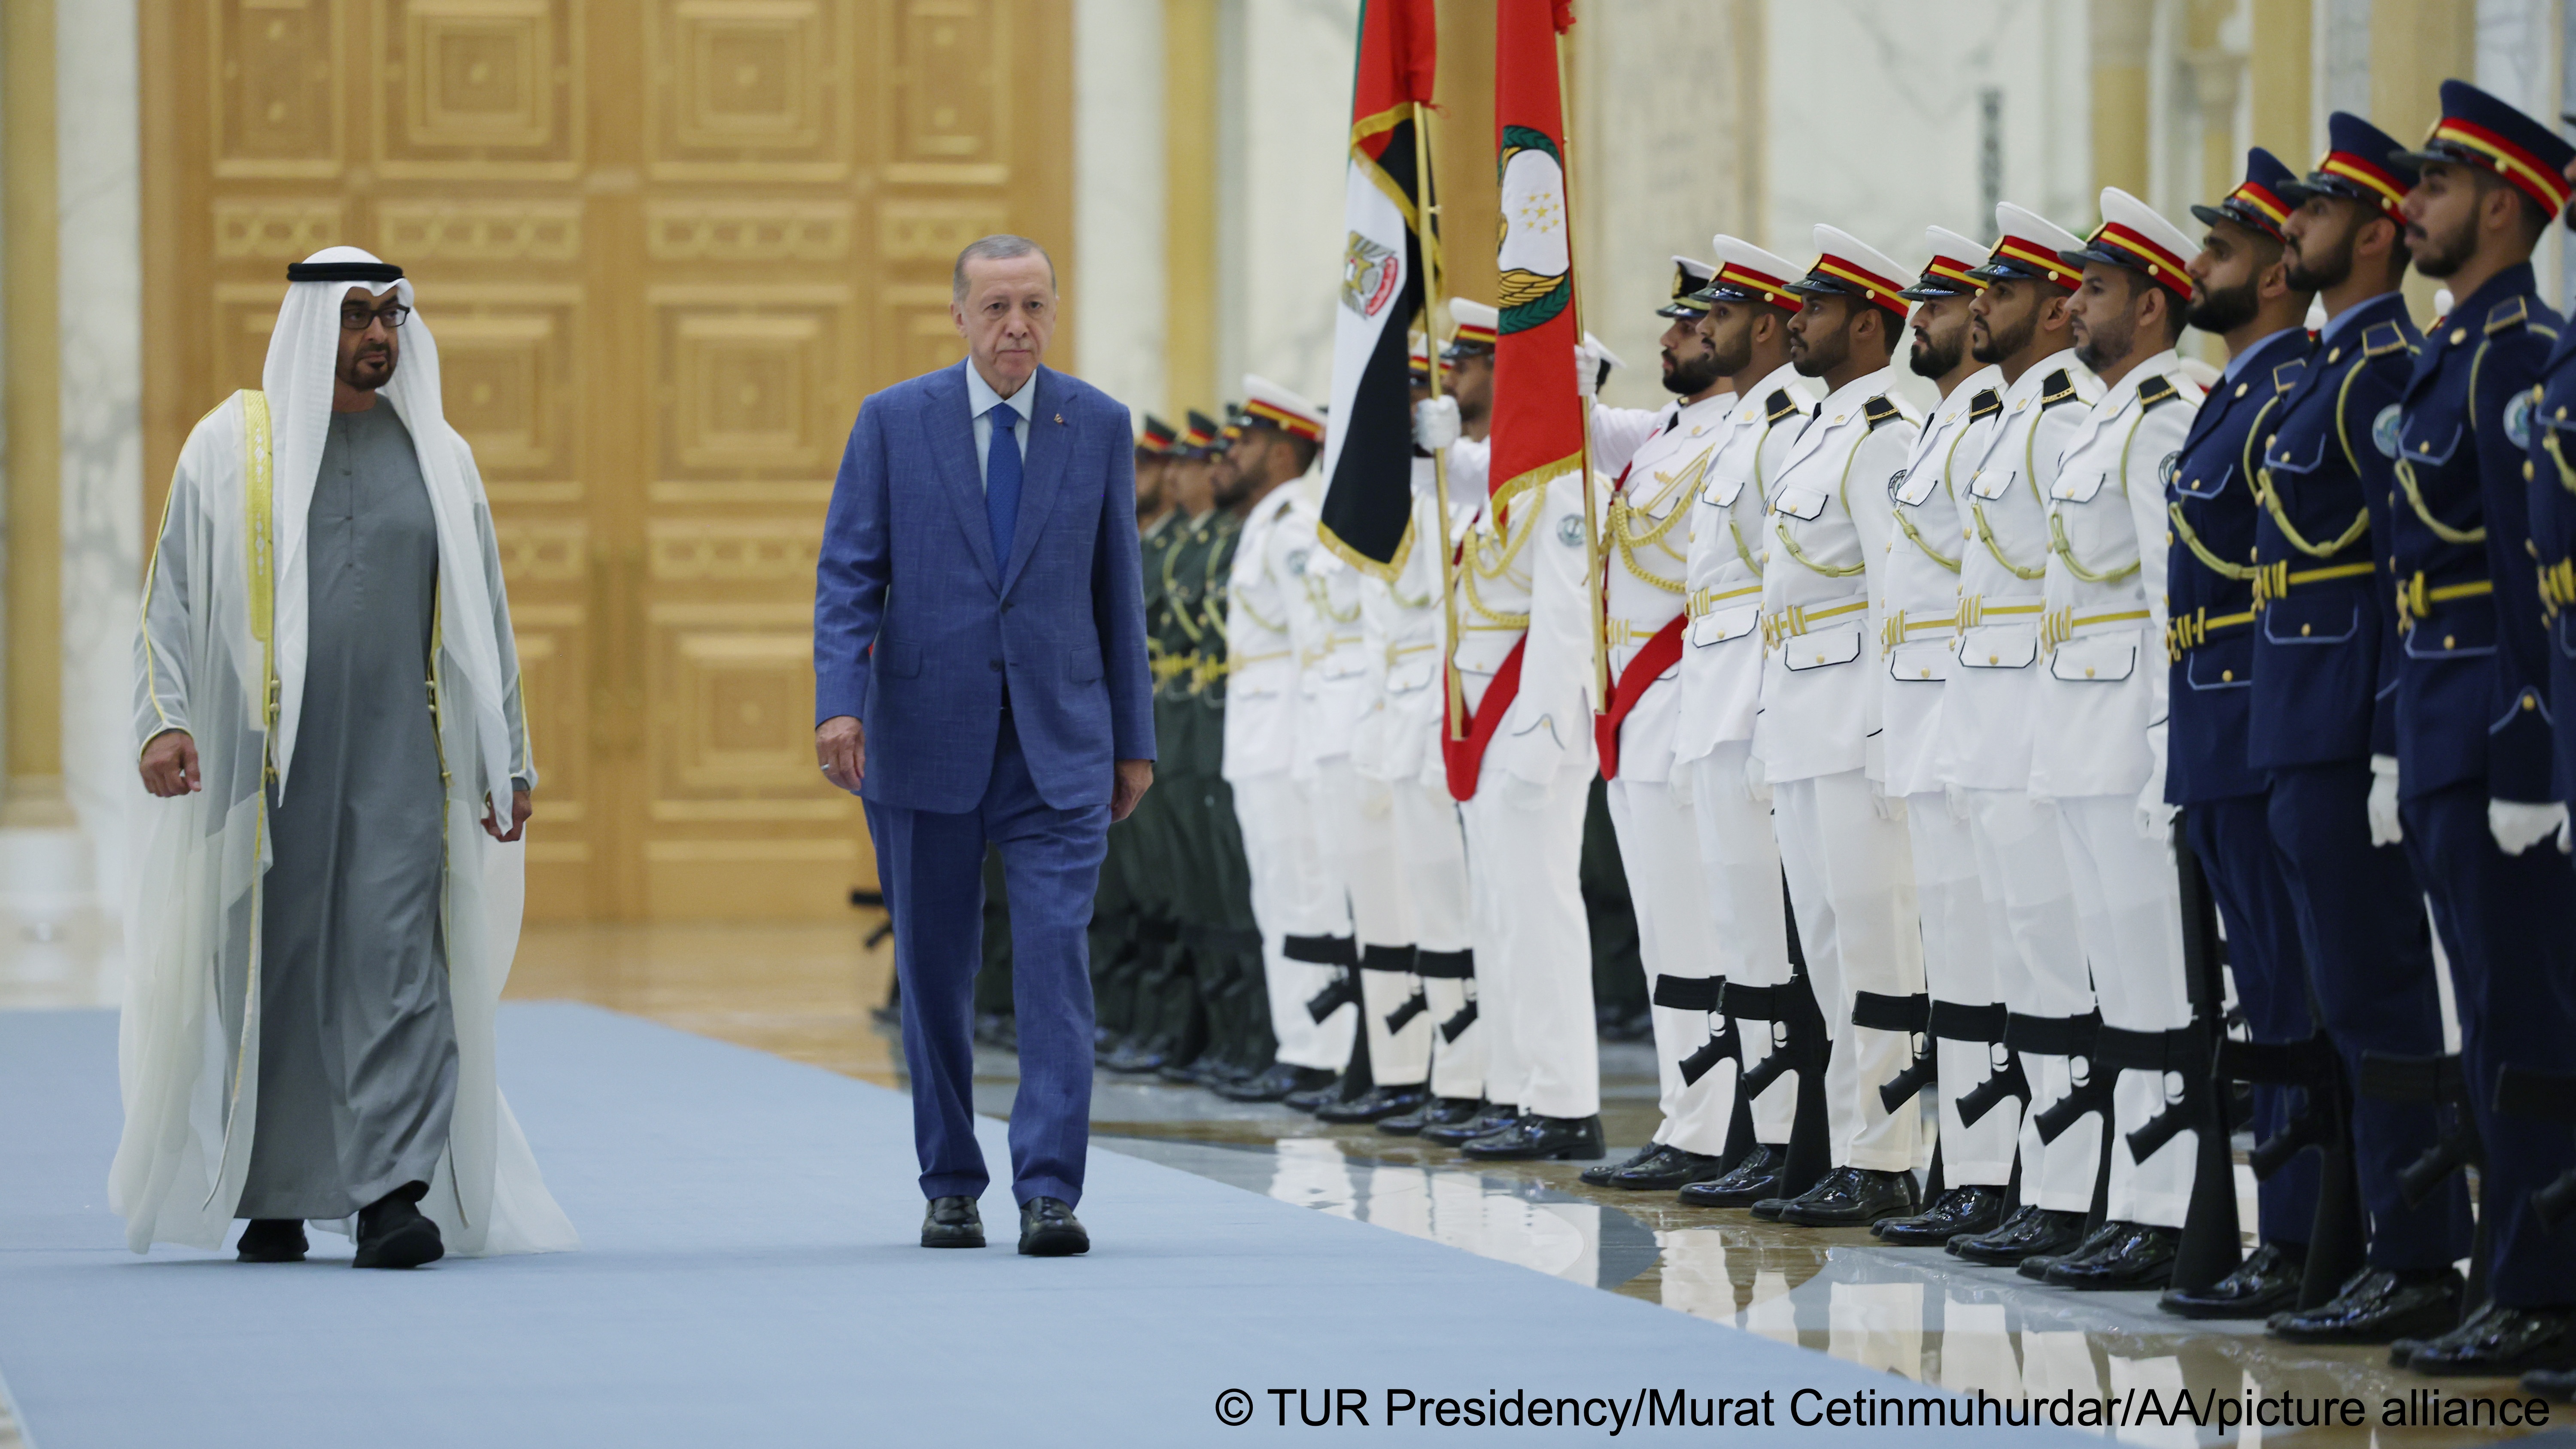 Turkish President Erdogan's latest visit to the Gulf states was his most productive so far, signing defence cooperation and other deals worth billions of dollars. But is a strategic partnership really possible while Turkey and the UAE continue to back conflicting sides in various regional crises? 